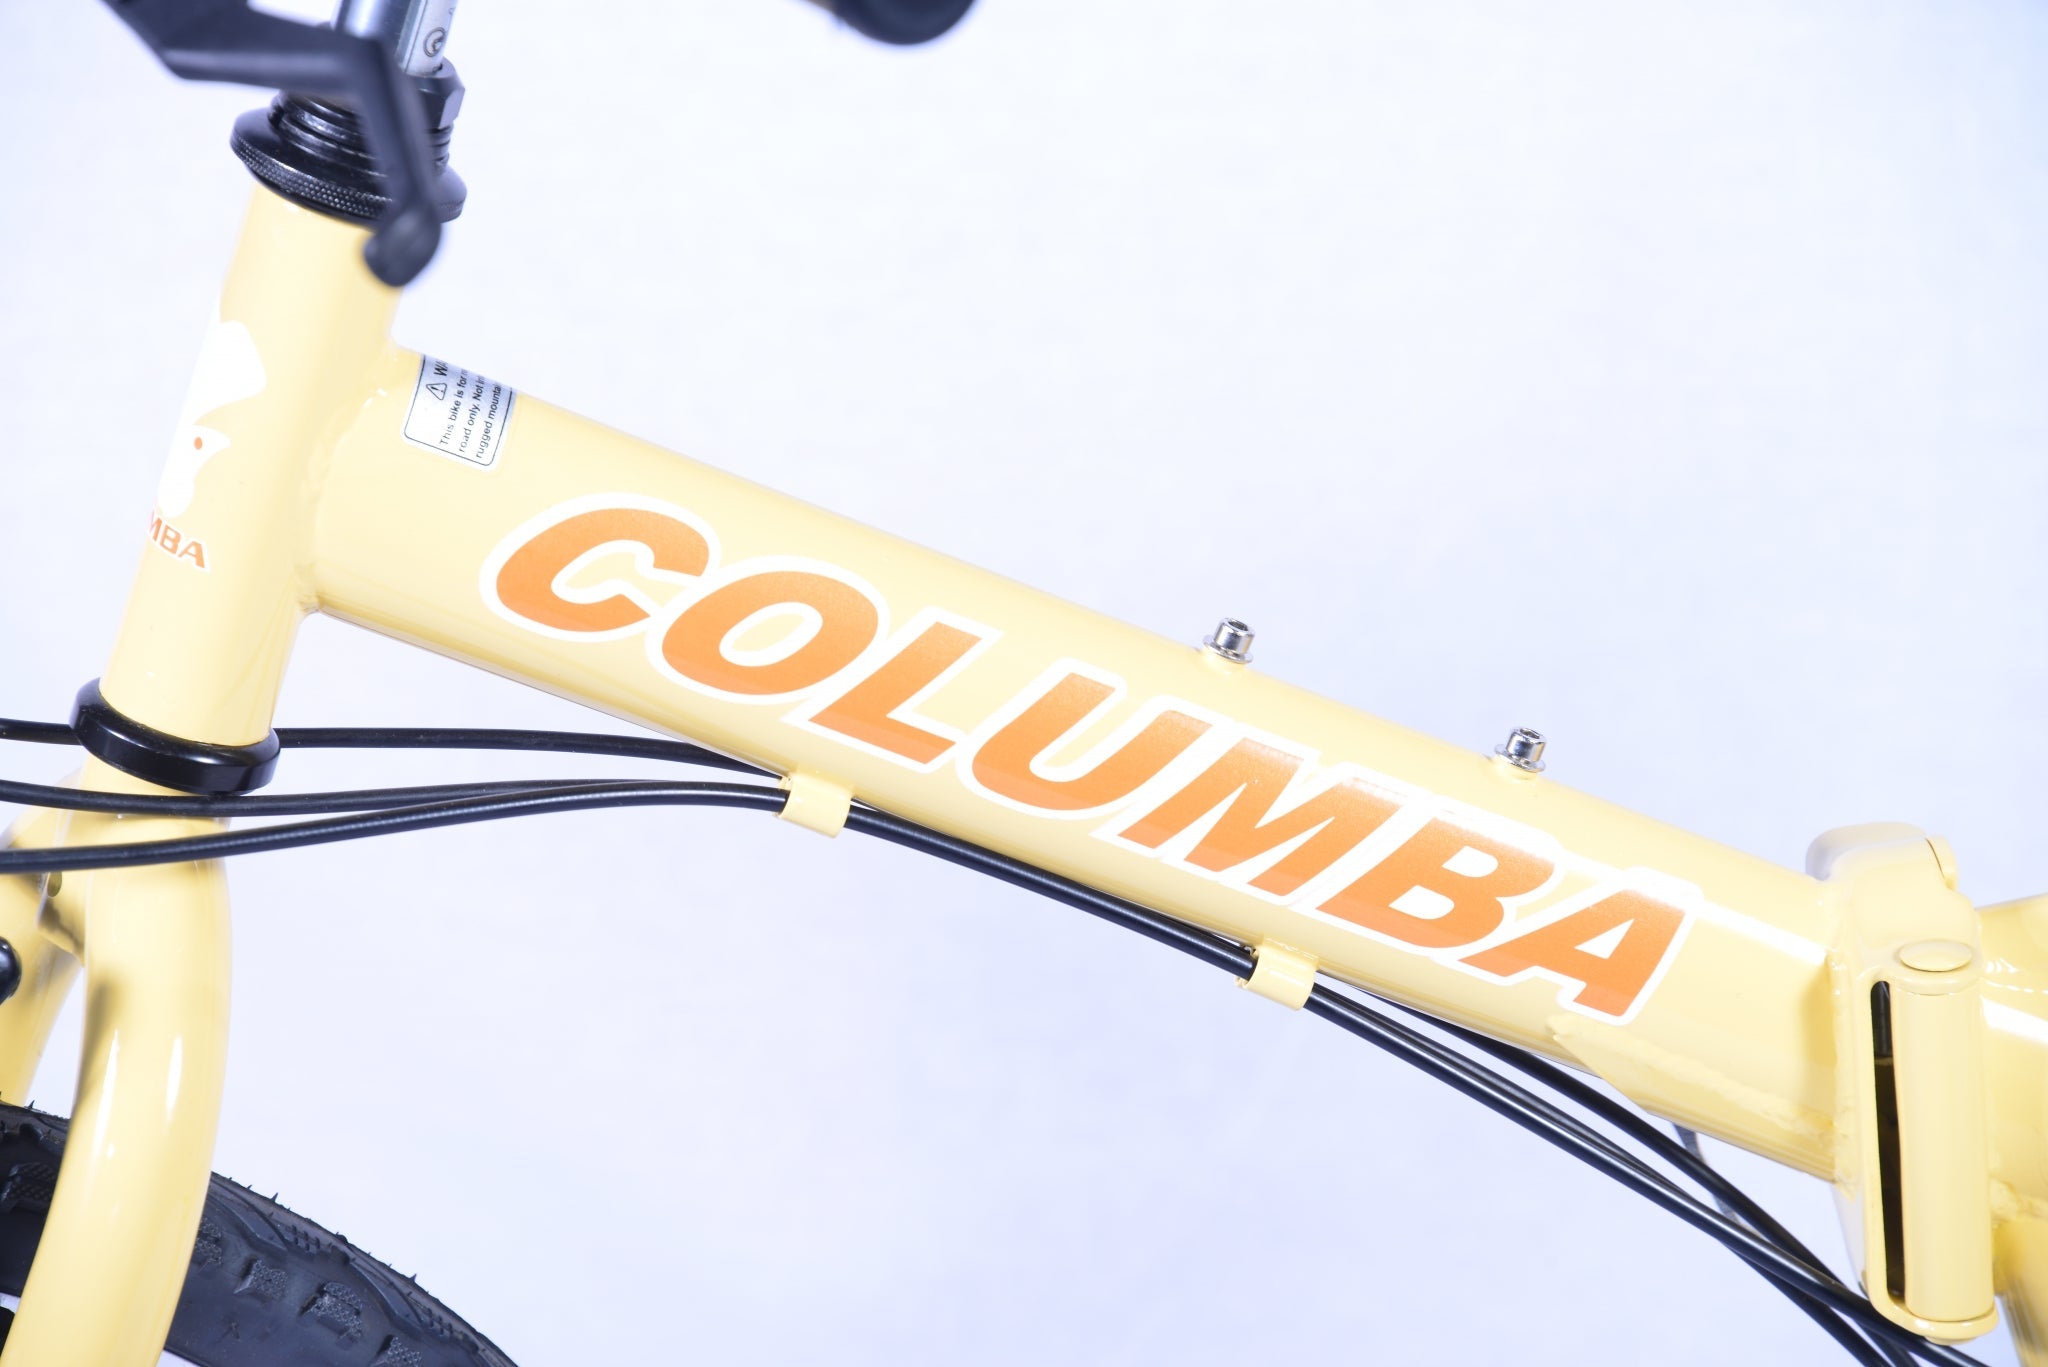 Bike frame of a yellow-colored folding bicycle with an orange and white logo word mark titled "Columba."